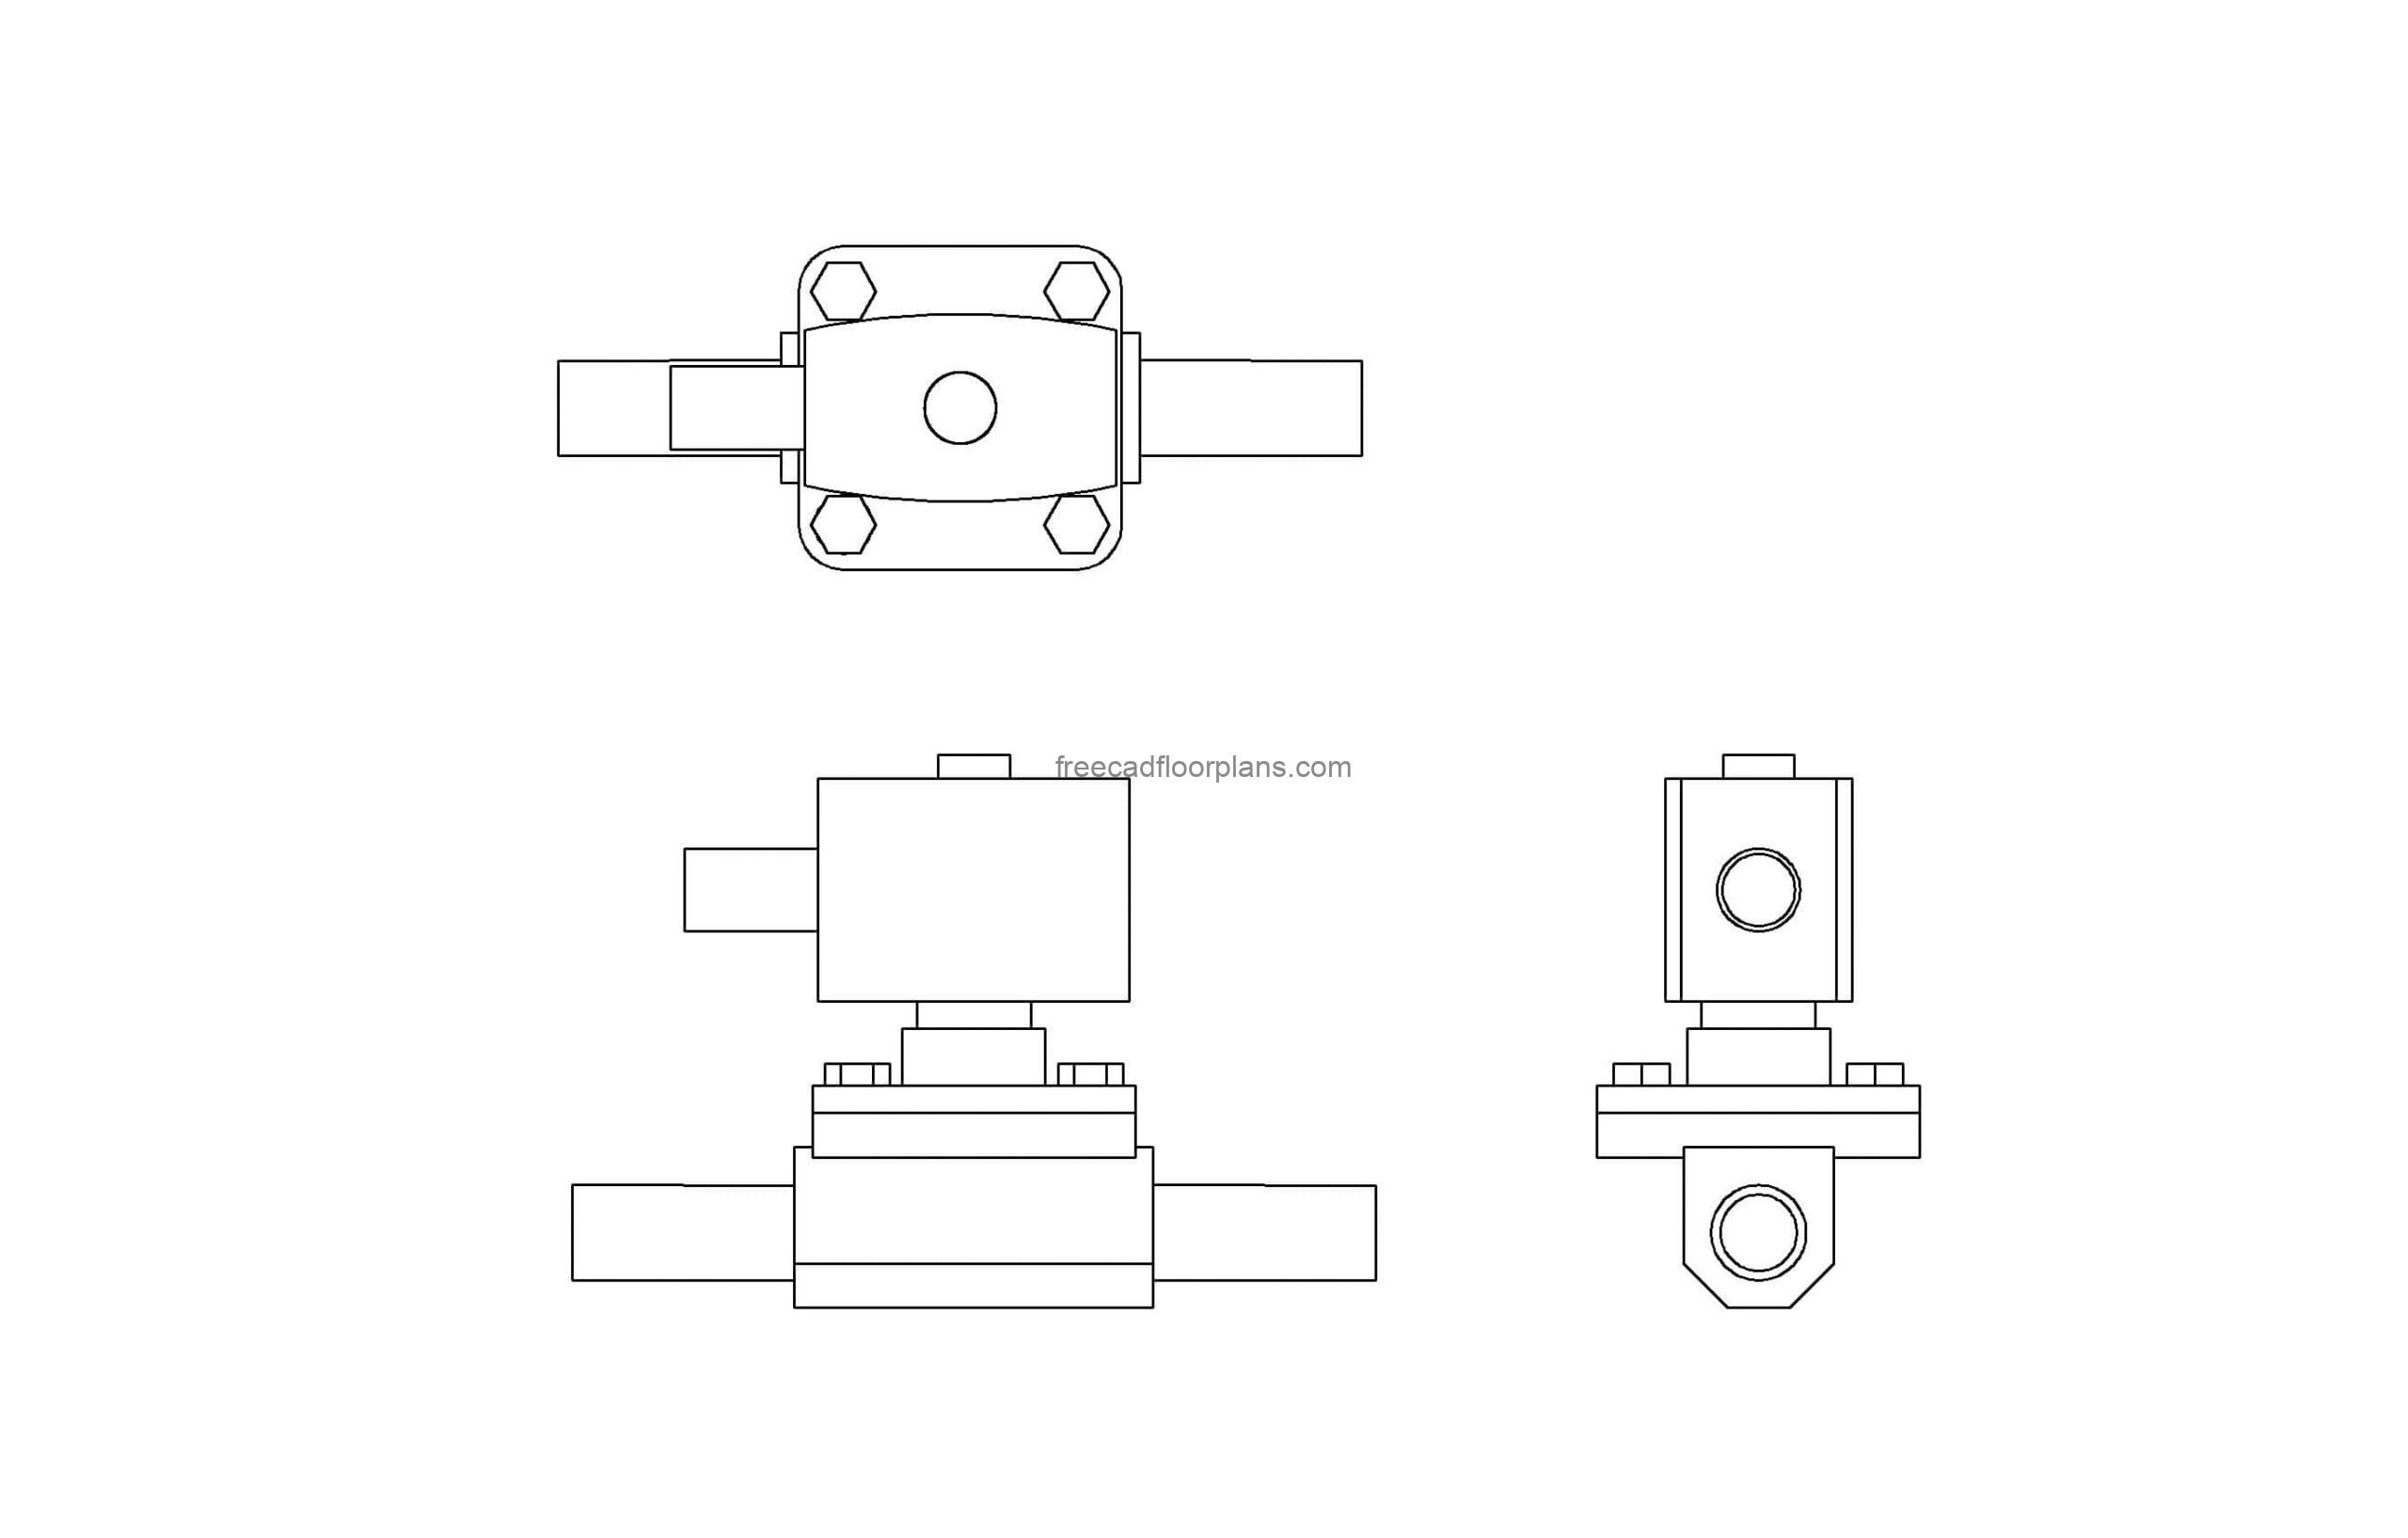 autocad drawing of a solenoid valve, 2d view plan and elevation dwg file for free download